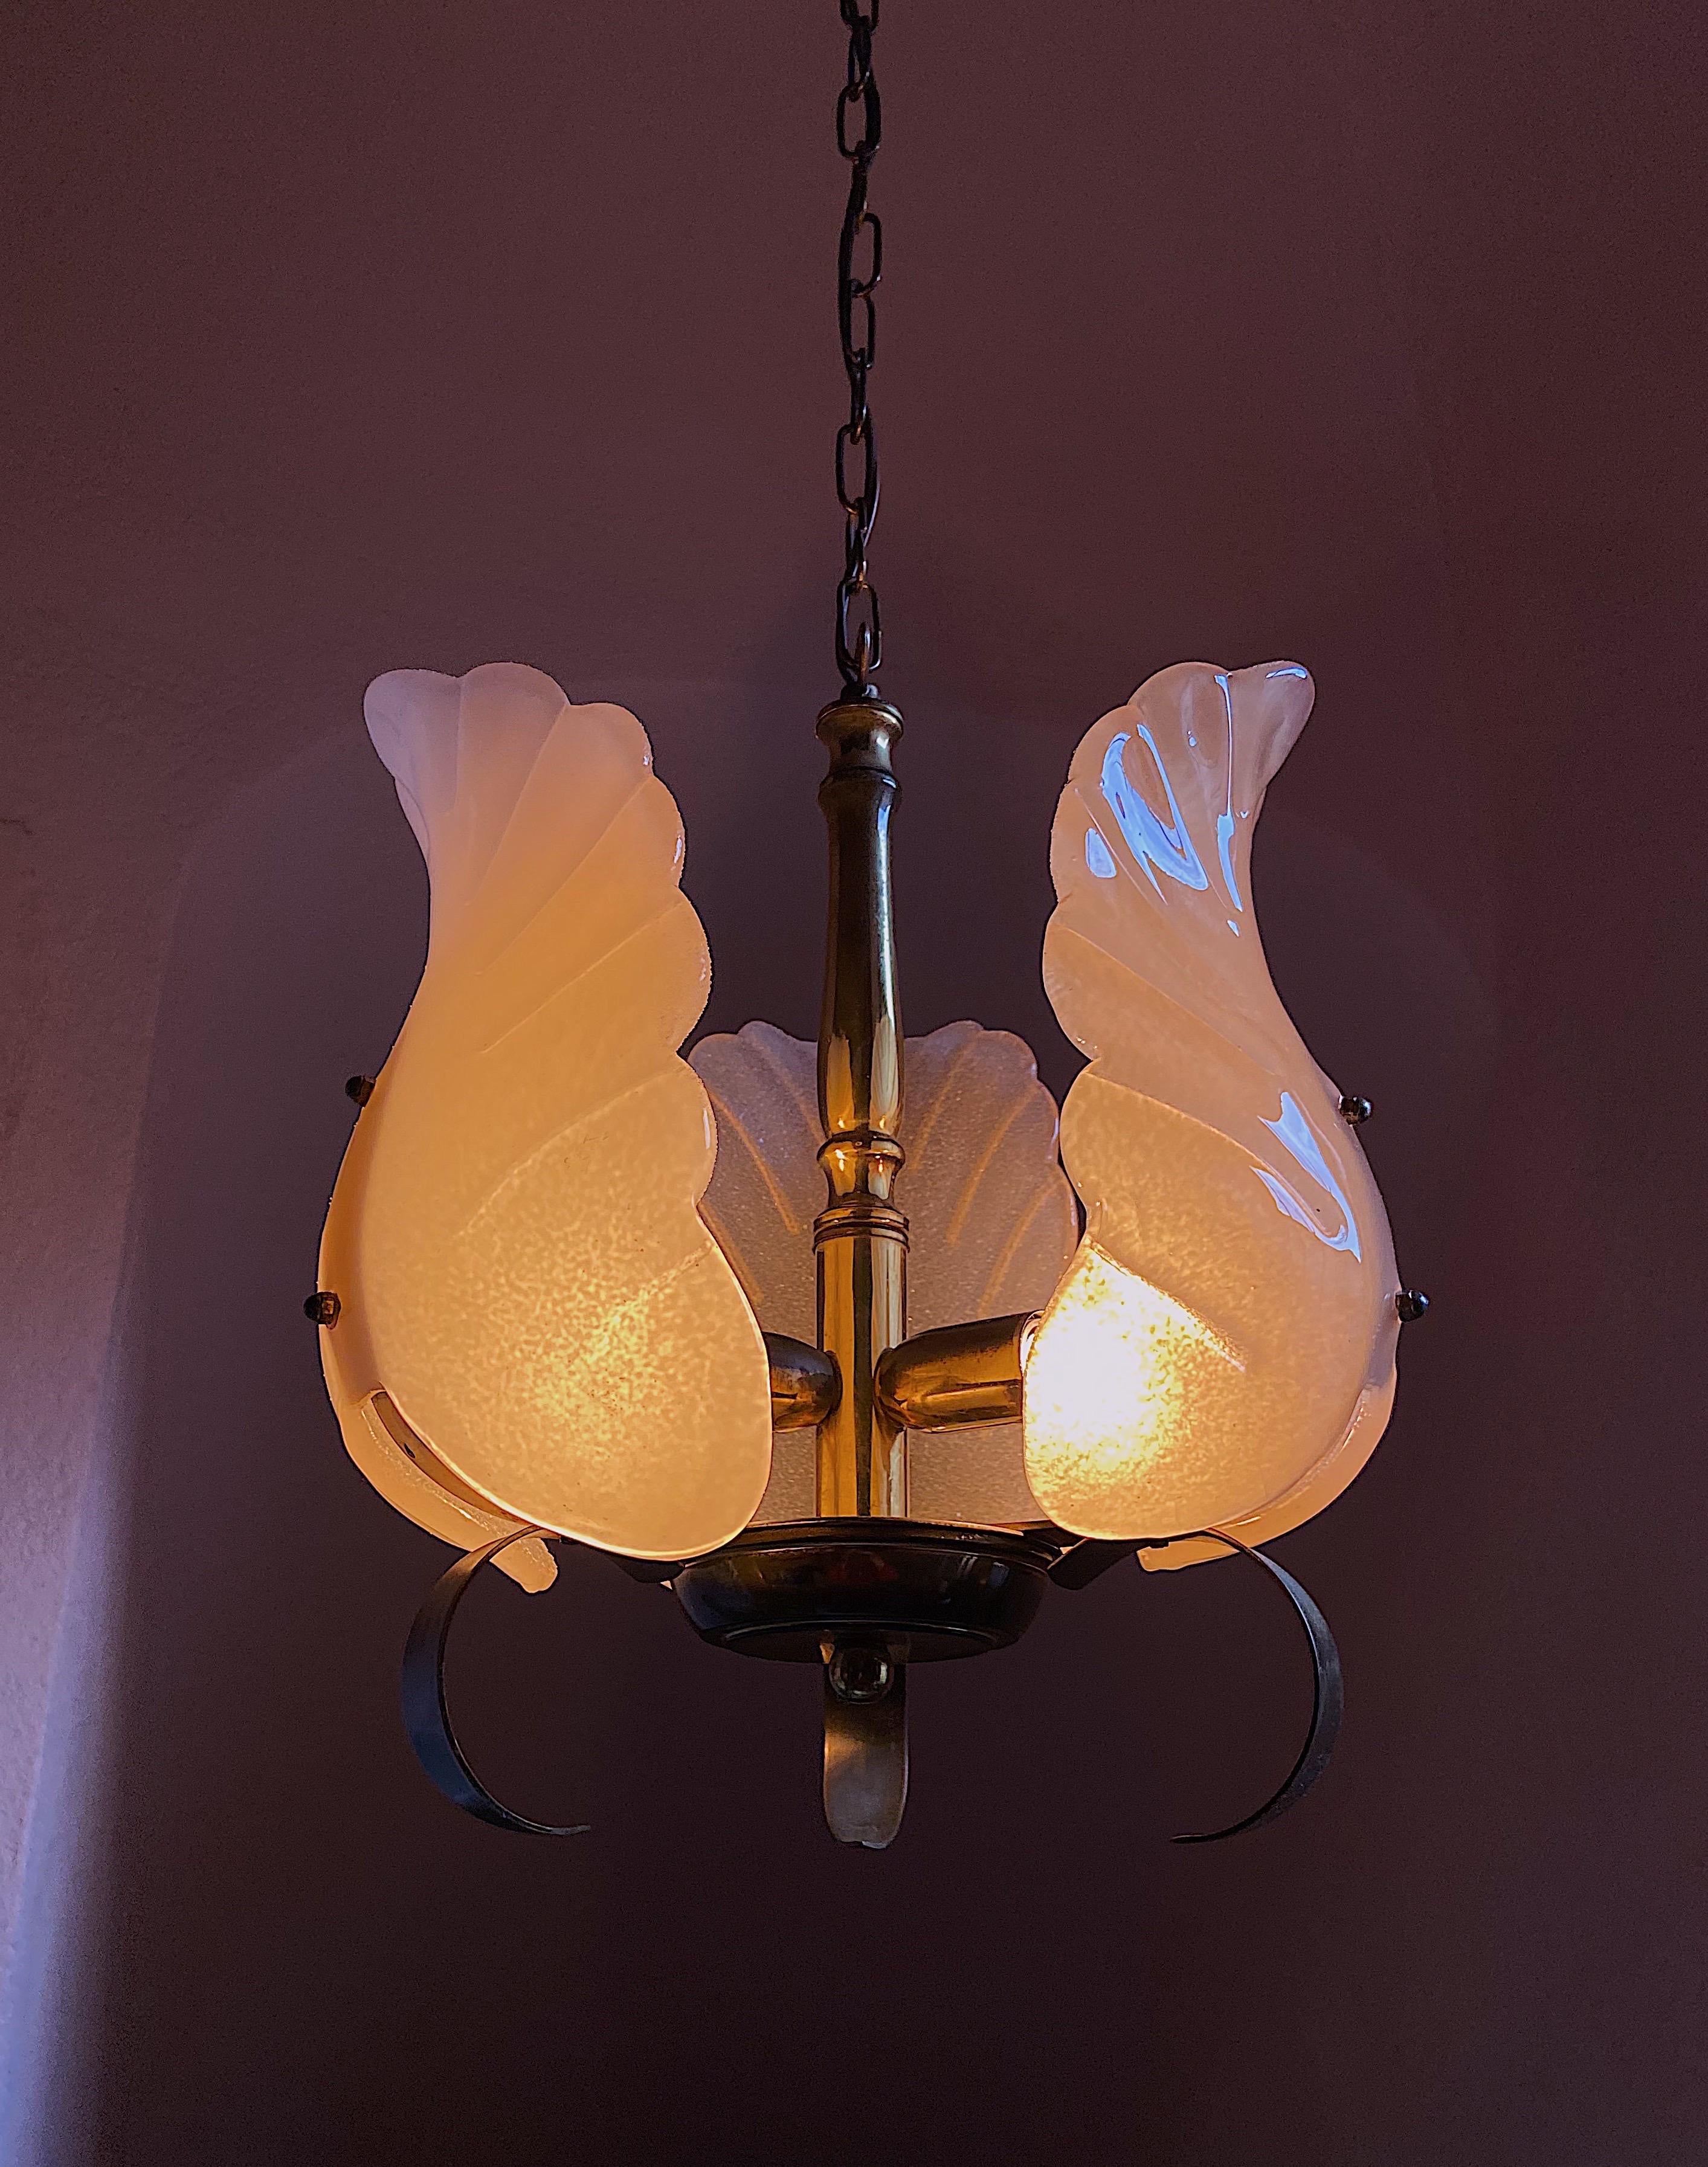 Very glamorous chandelier designed by Carl Fagerlund for Orrefors, Sweden. The light features a polished brass frame with three stunning Murano glass leaves. The glass have a matte frosted relief on the inside and are shiny on the outside. This